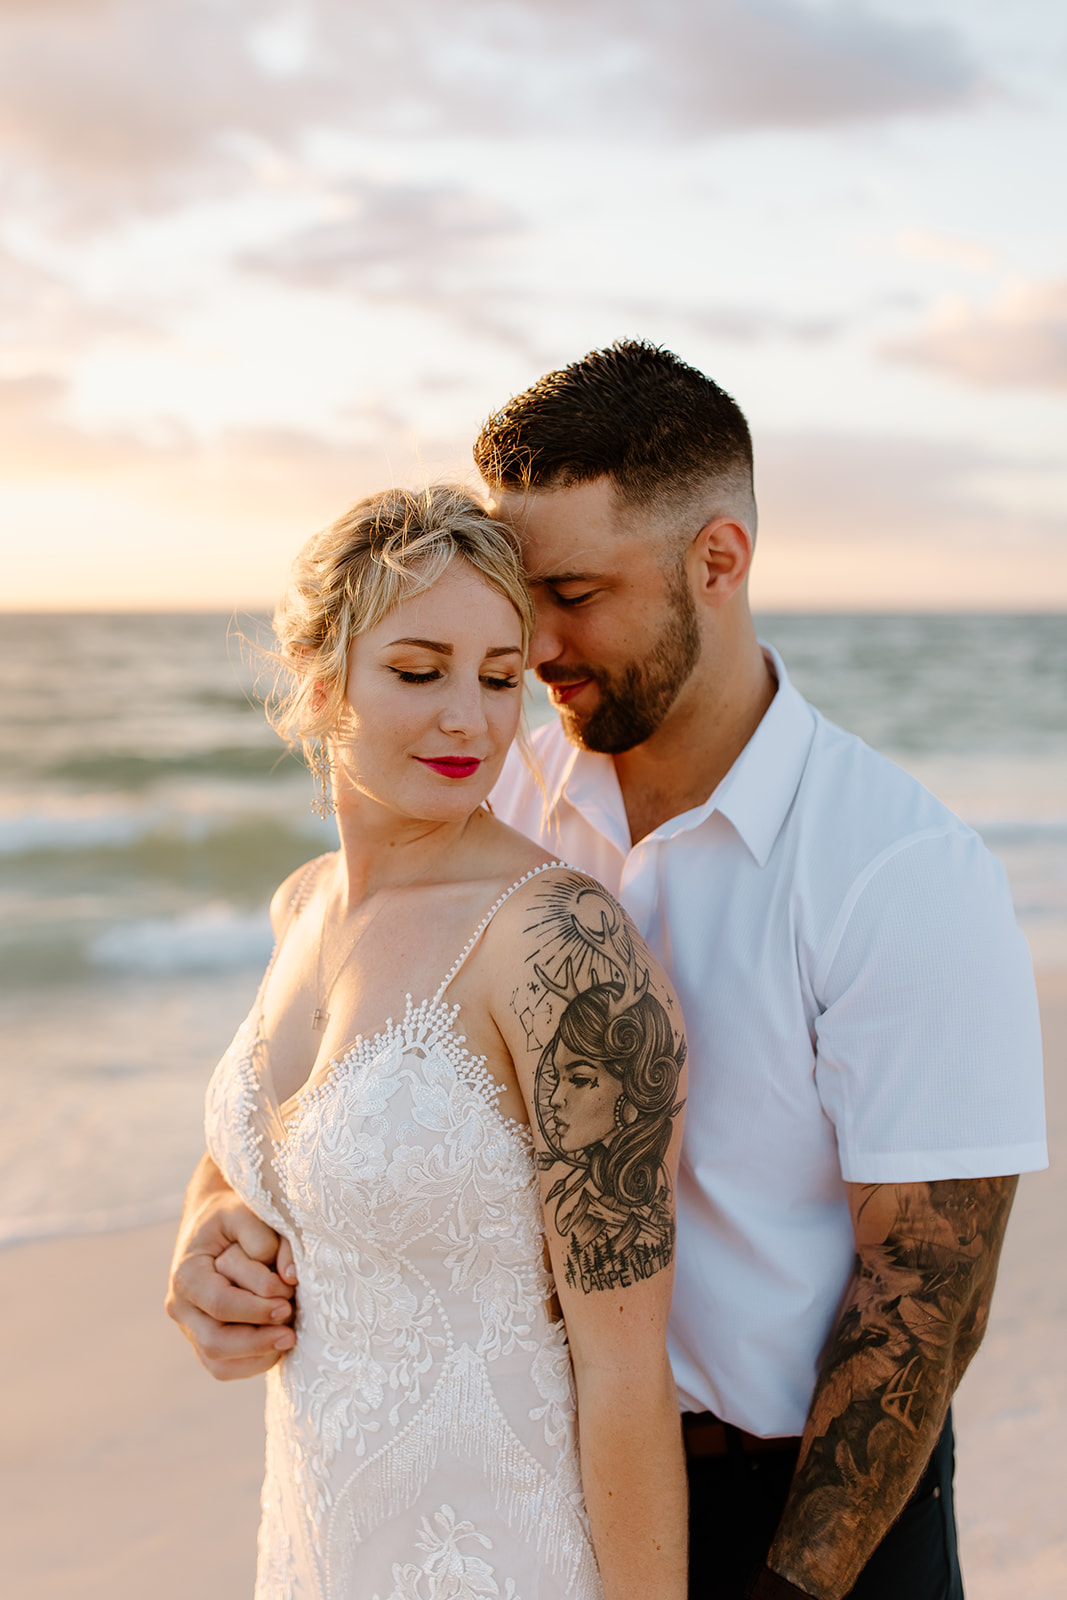 Bride stands in front of her groom on the beach in front of the sunset